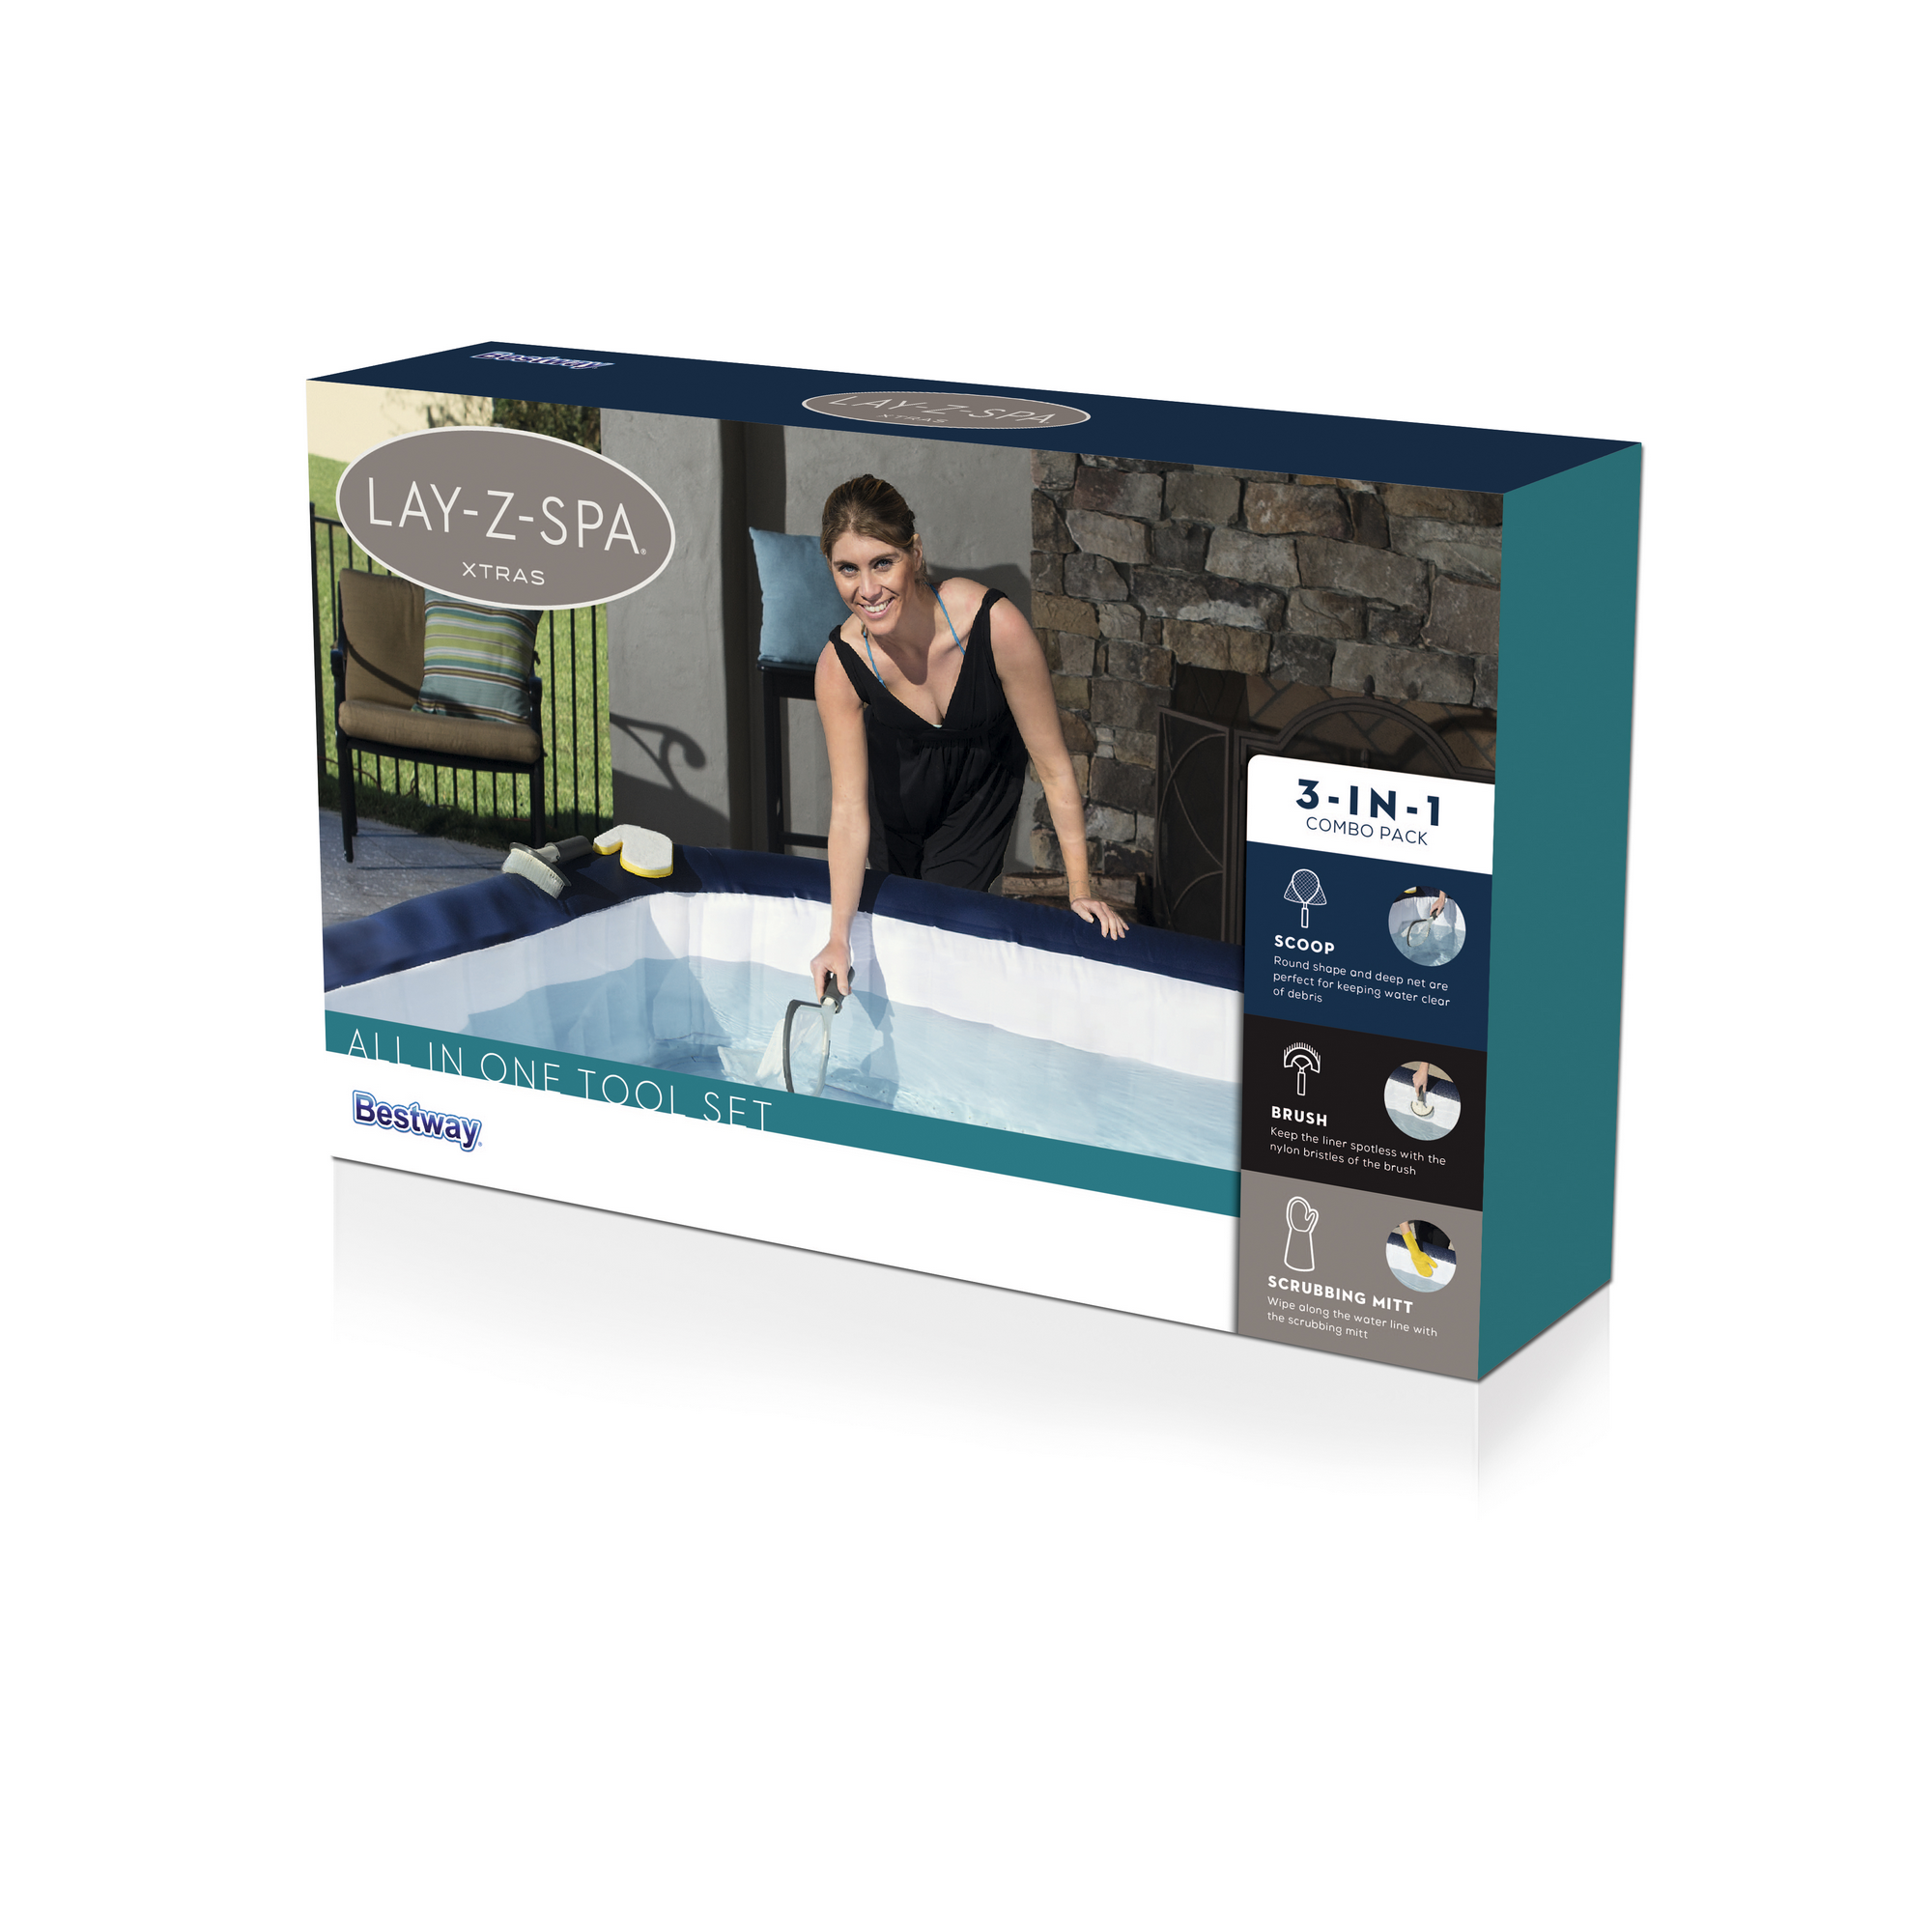 Reinignungs-Set 'Lay-Z-Spa' All in One, 3 Teilig + product picture